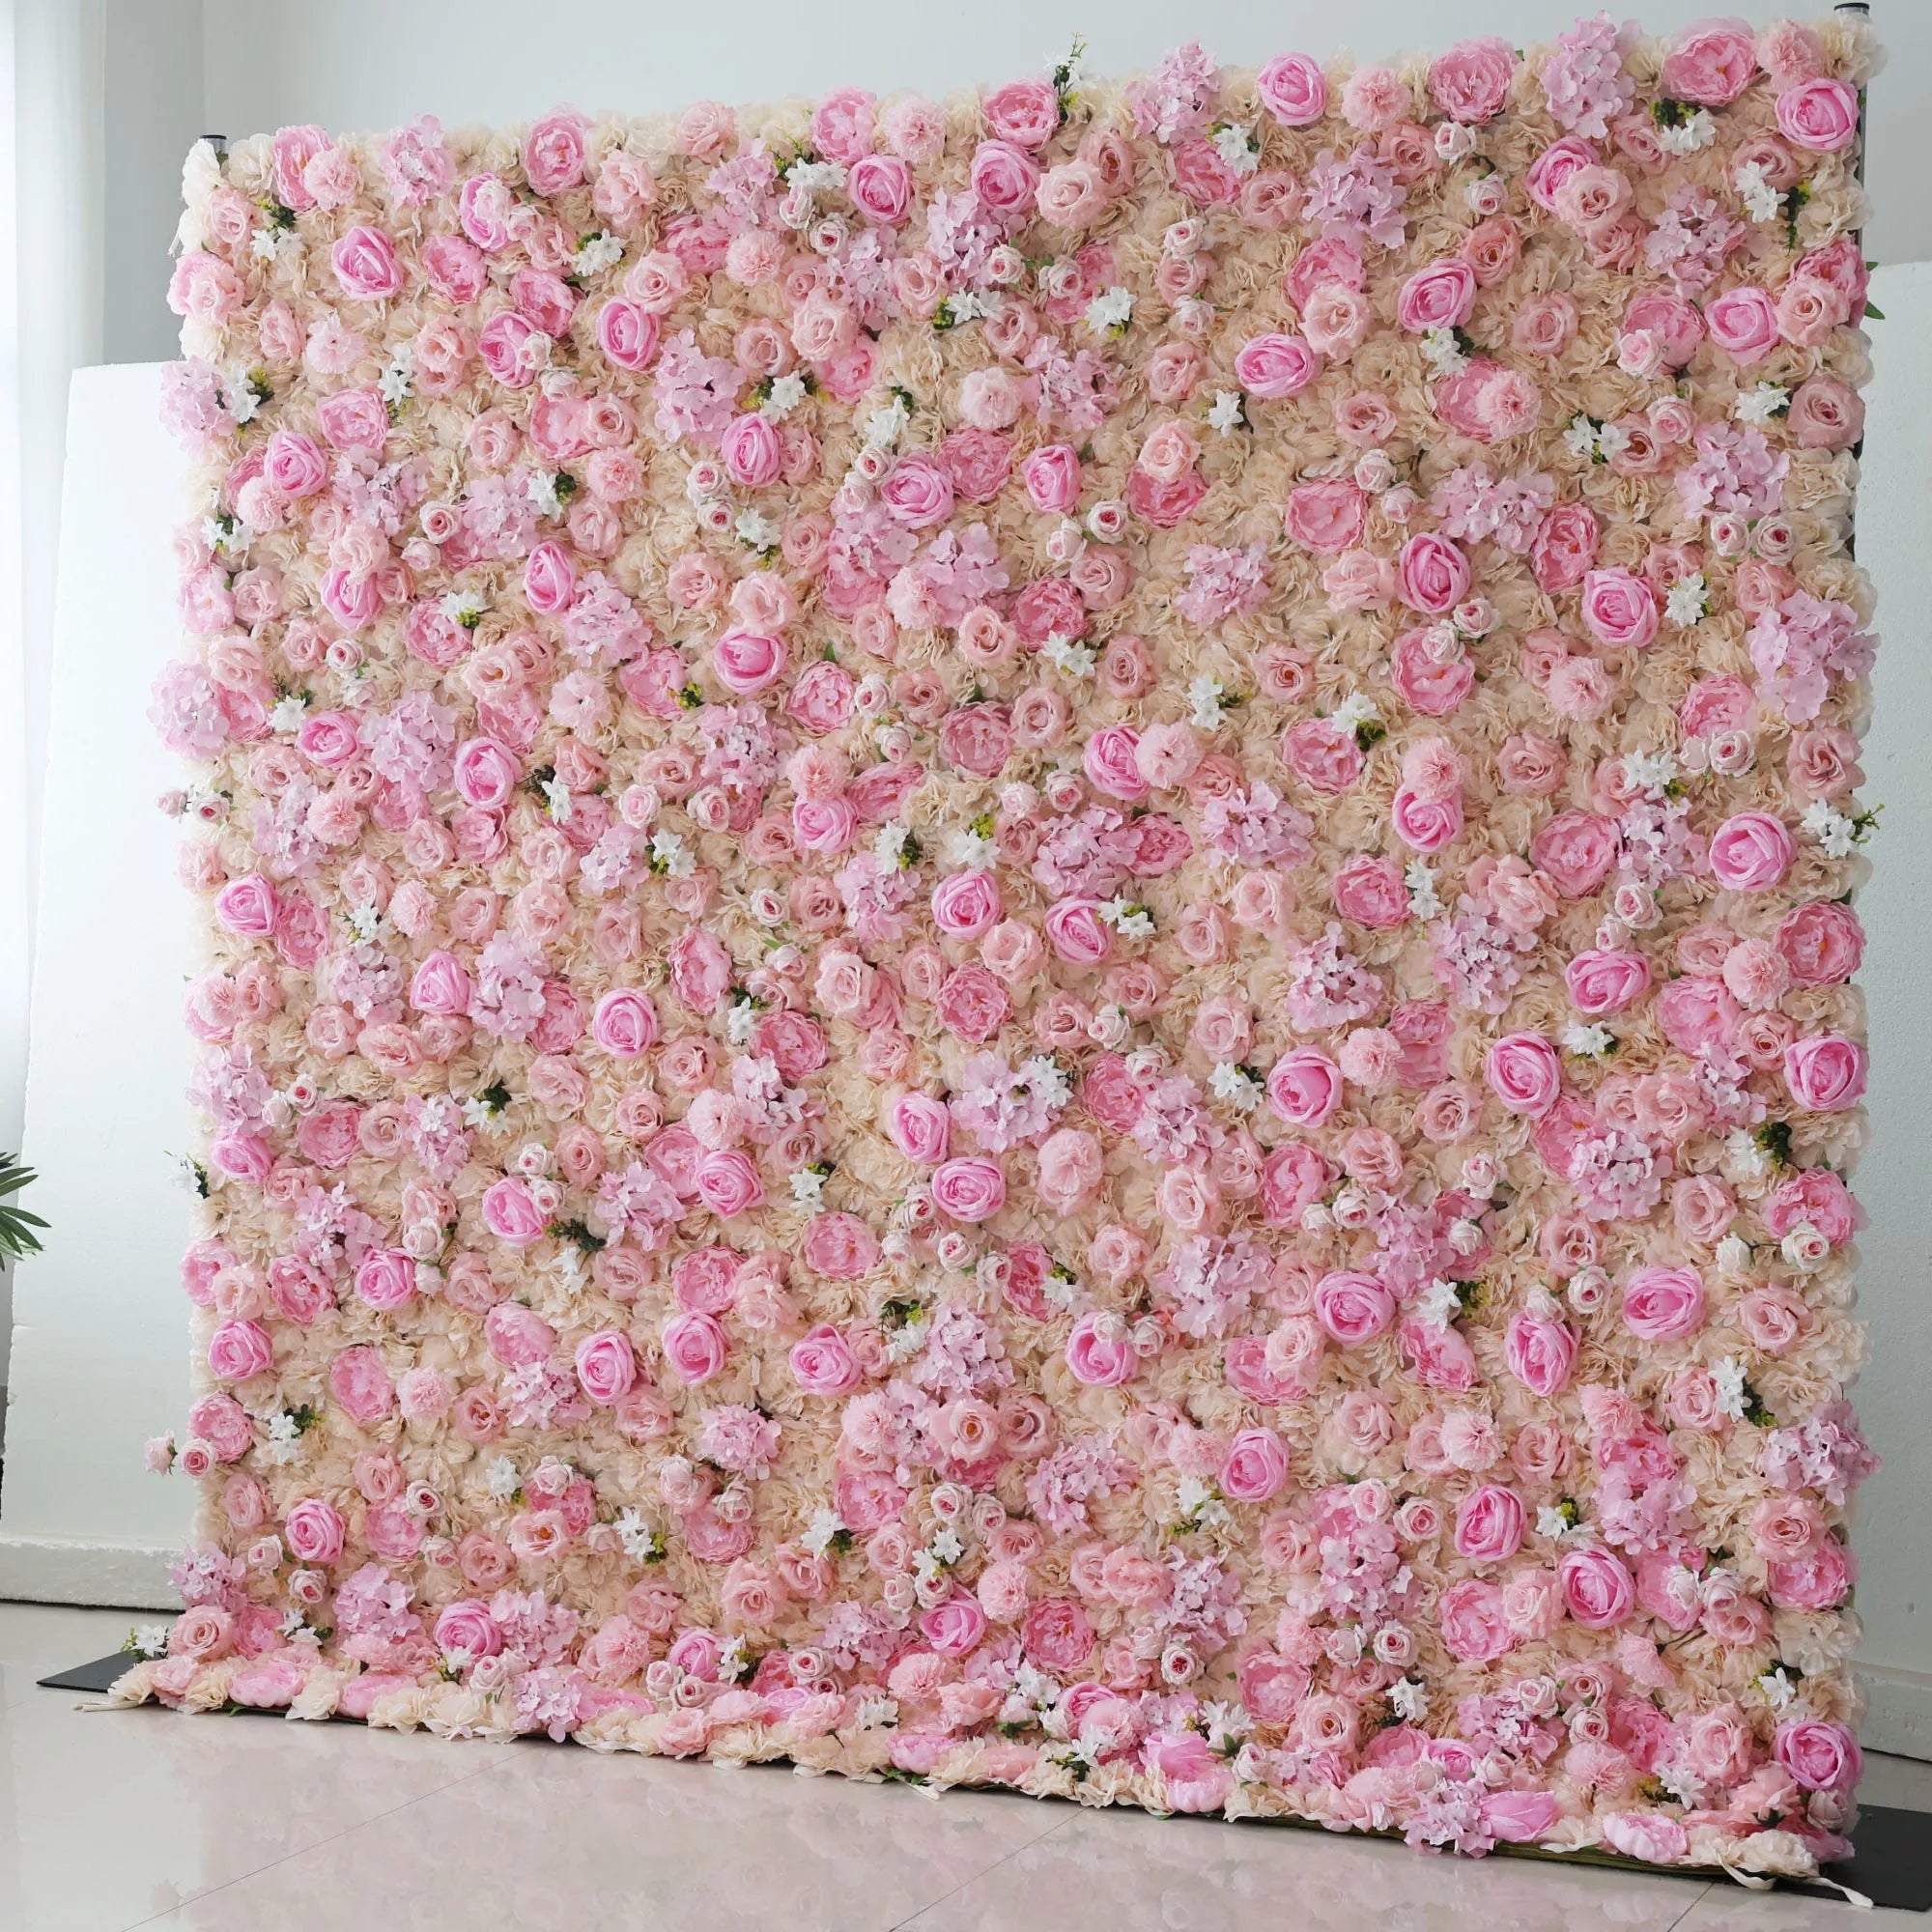 Blossom Bliss Backdrop: Immerse in a world of romantic resplendence with our Enchanted Pink Rose Edition. A backdrop radiating soft symphony and timeless tenderness.